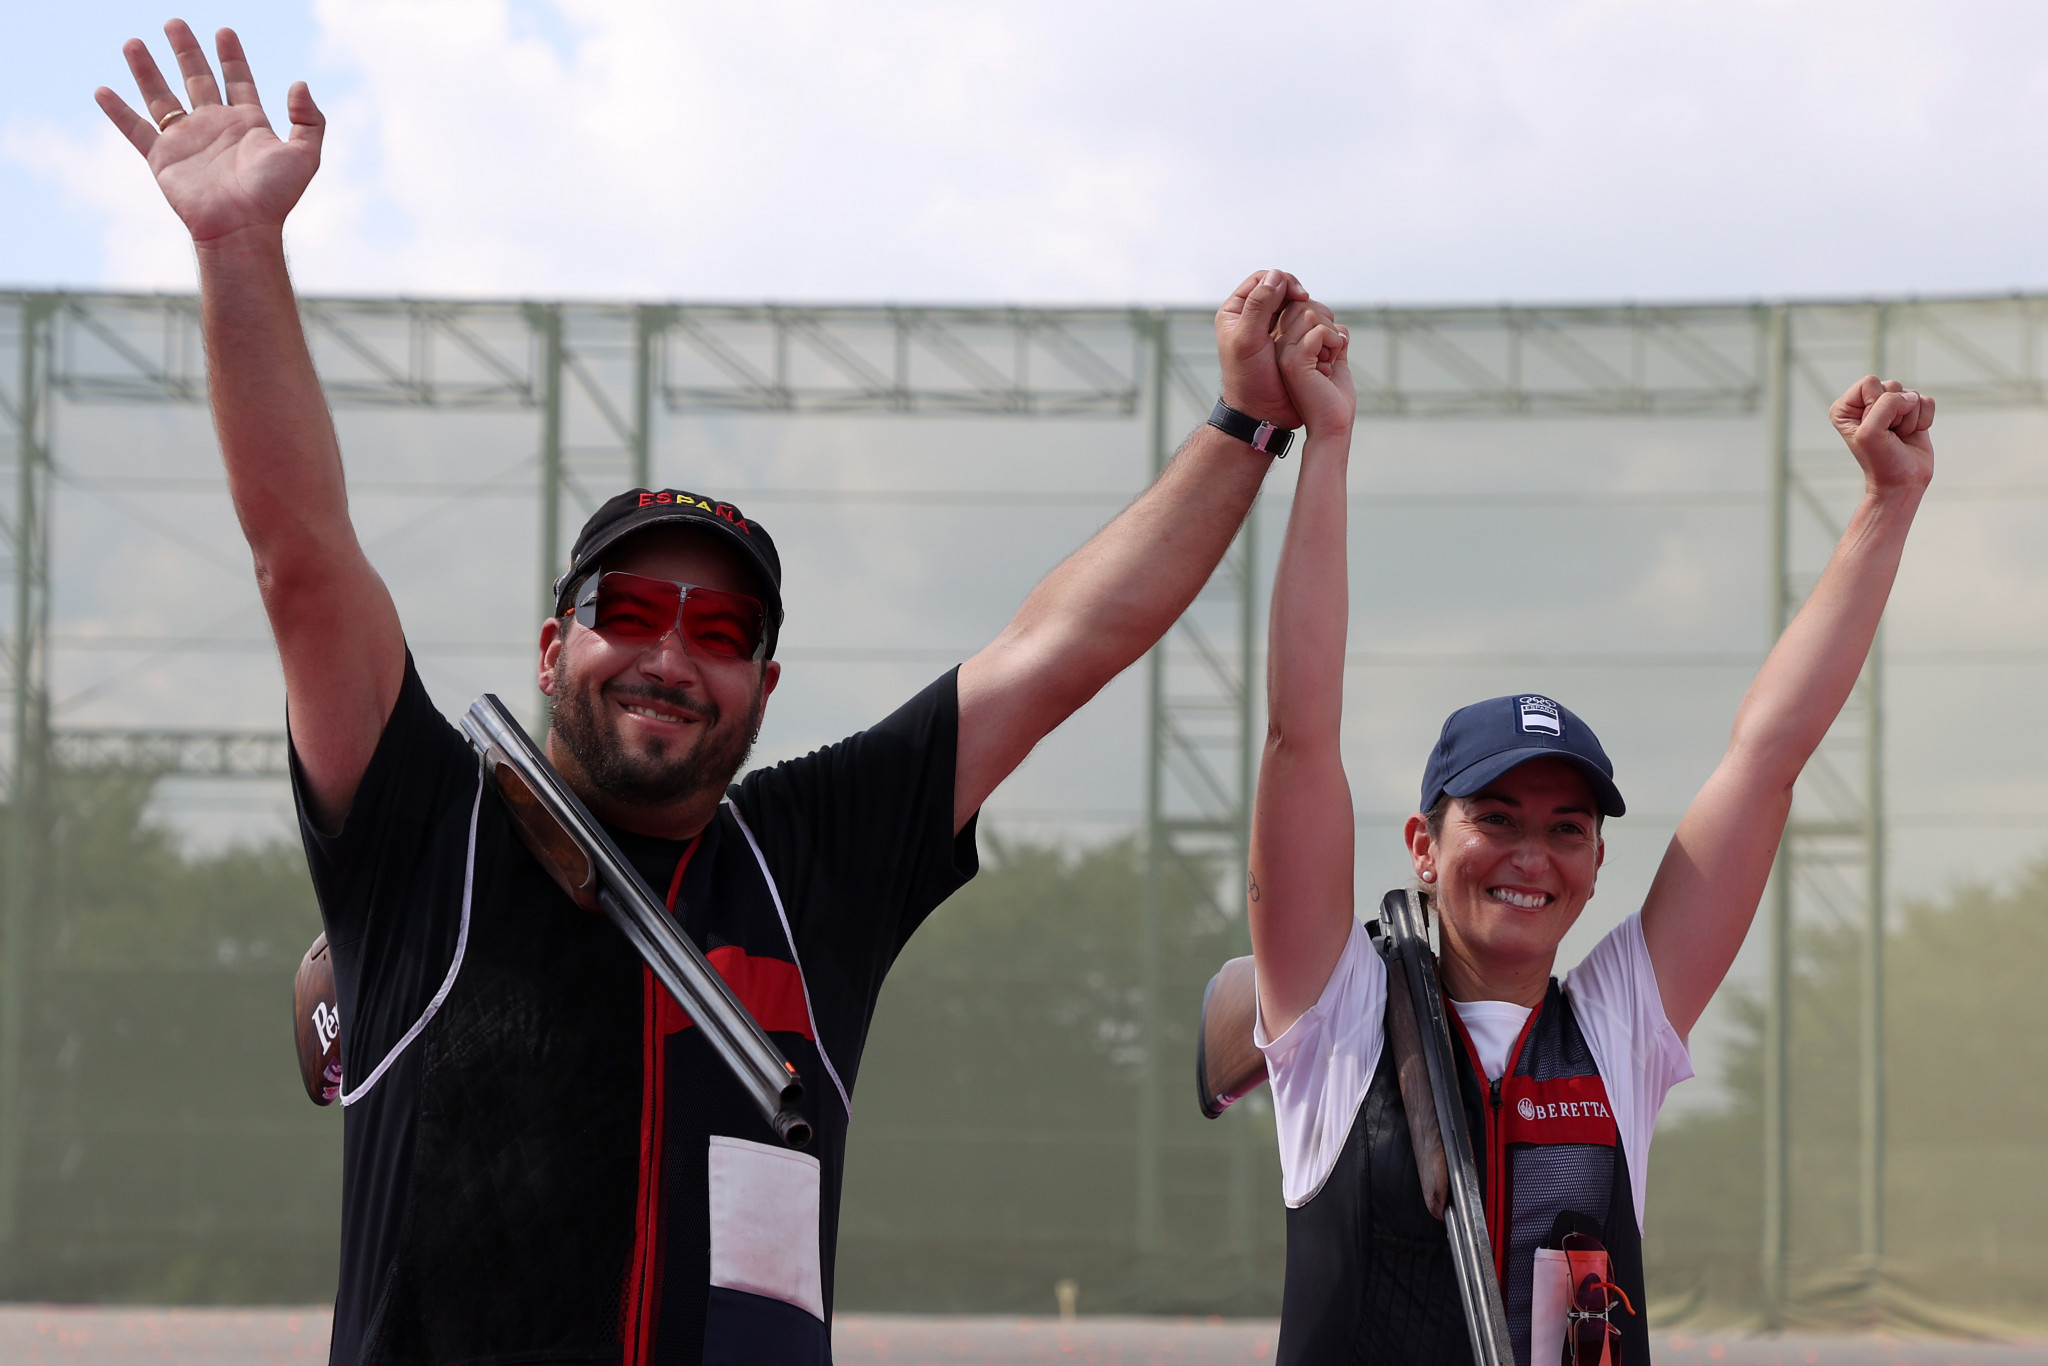 Spain win trap mixed team at ISSF Shotgun World Cup in Lima